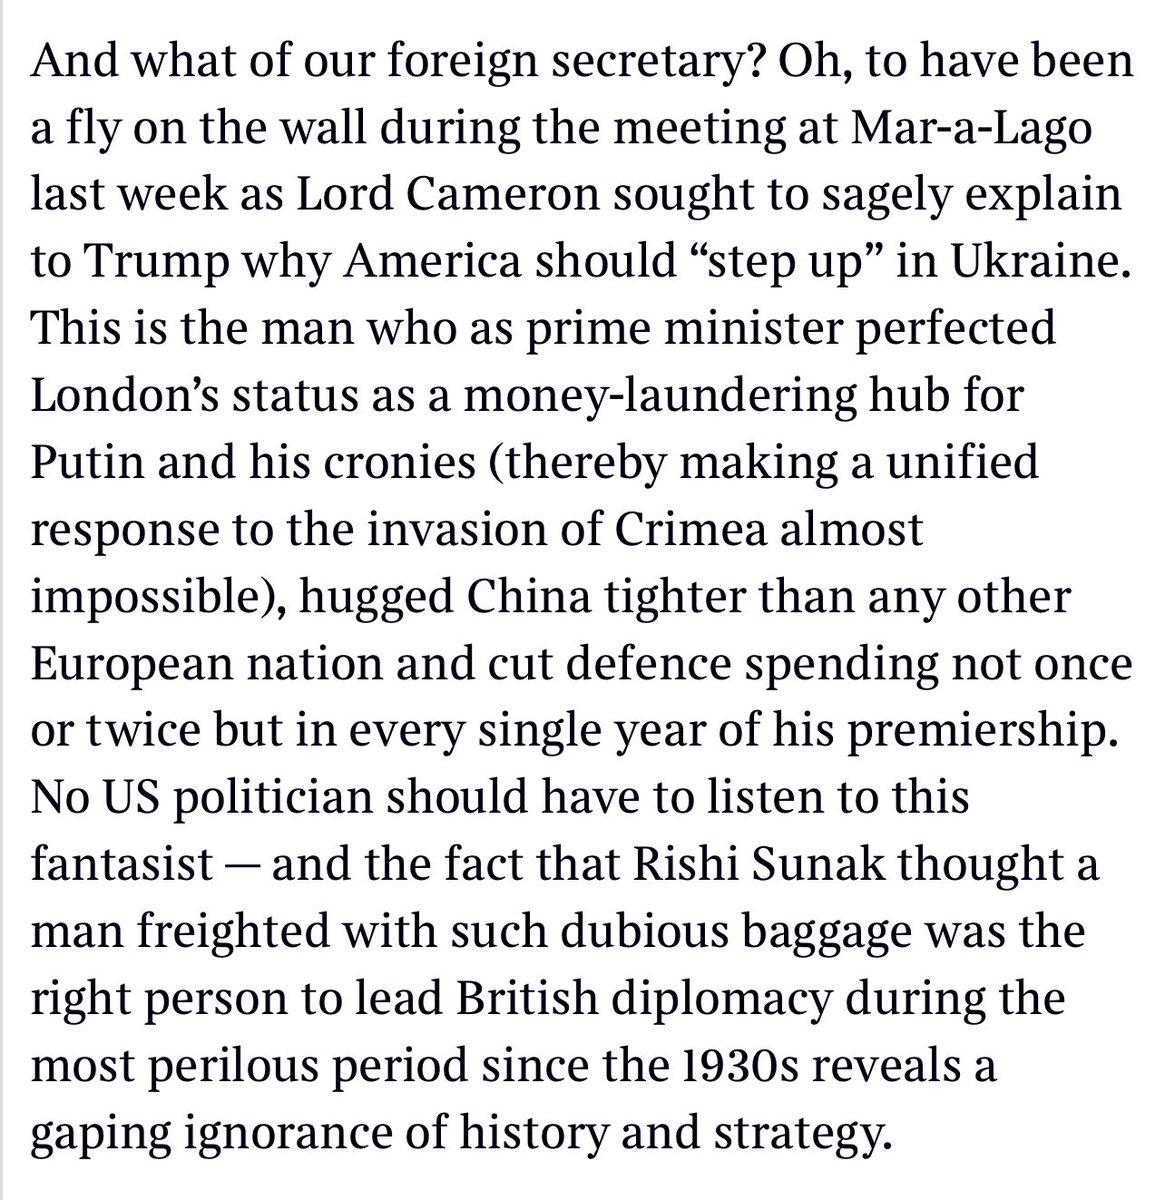 Devastating analysis of fantasy British foreign policy by @matthewsyed in @thetimes today. I couldn’t put it better myself (though I’ve tried); this is as good as it gets.